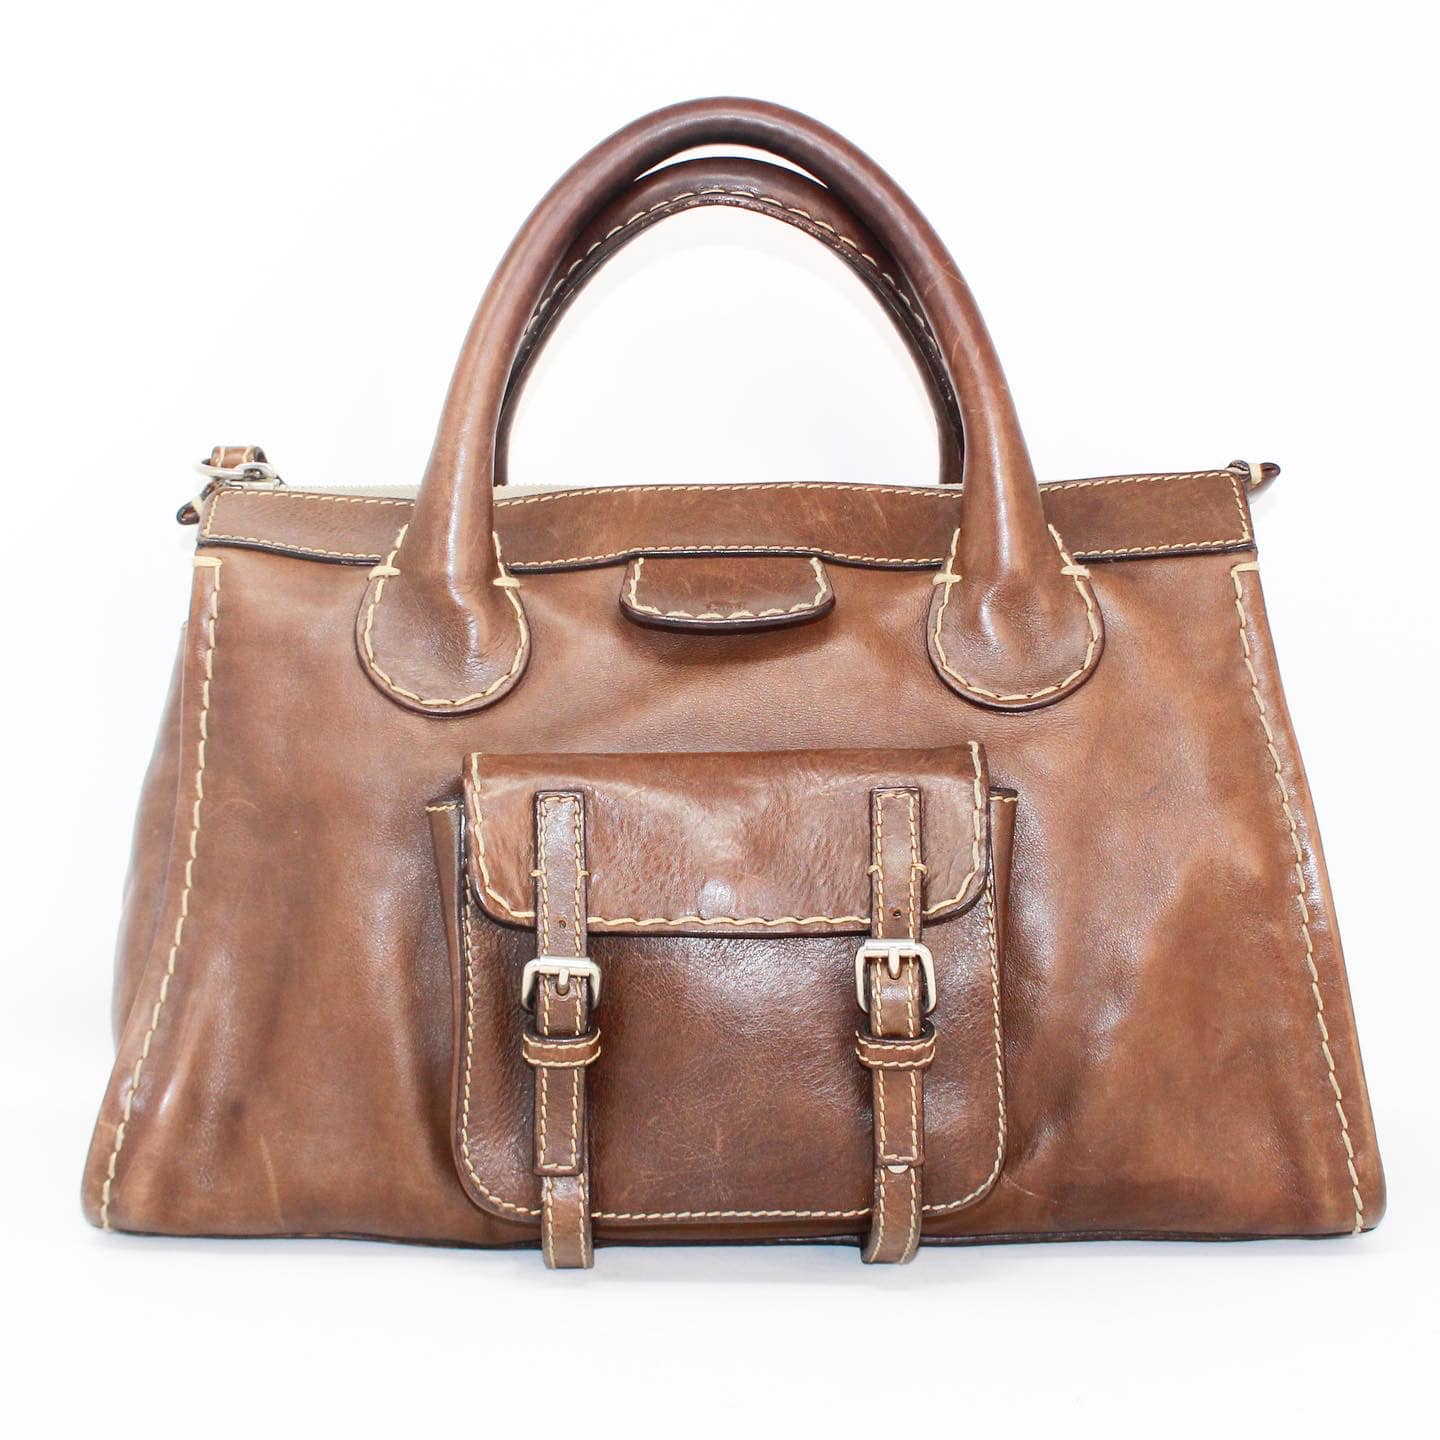 CLOE 38959 Brown Leather Tote Bag a